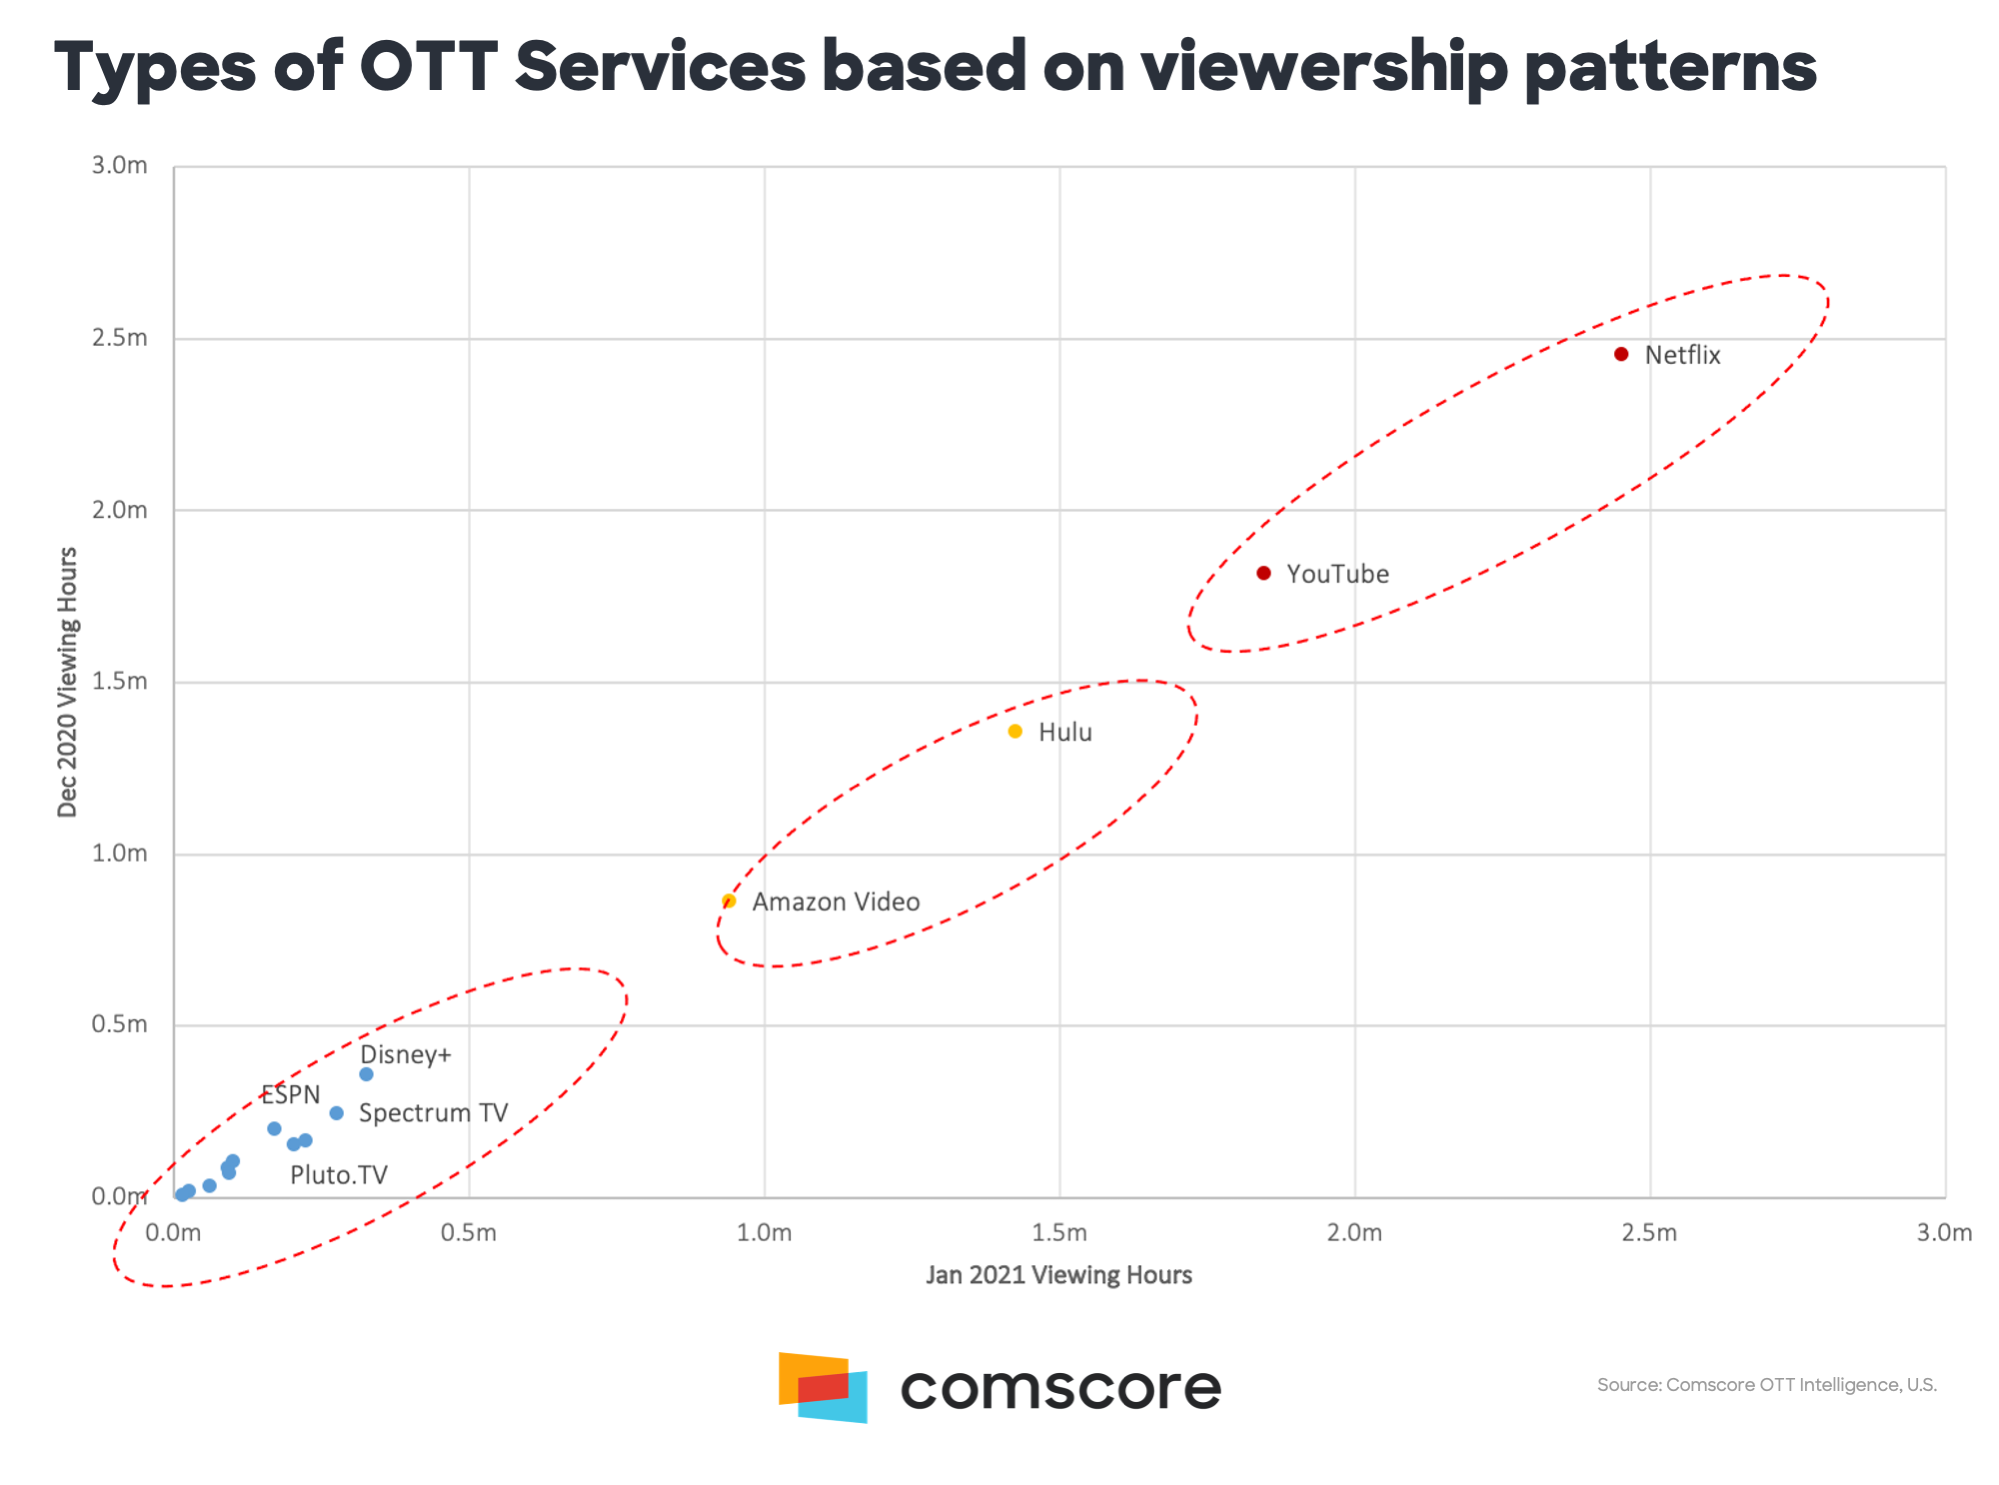 Types of OTT Services Based on Viewership Patterns